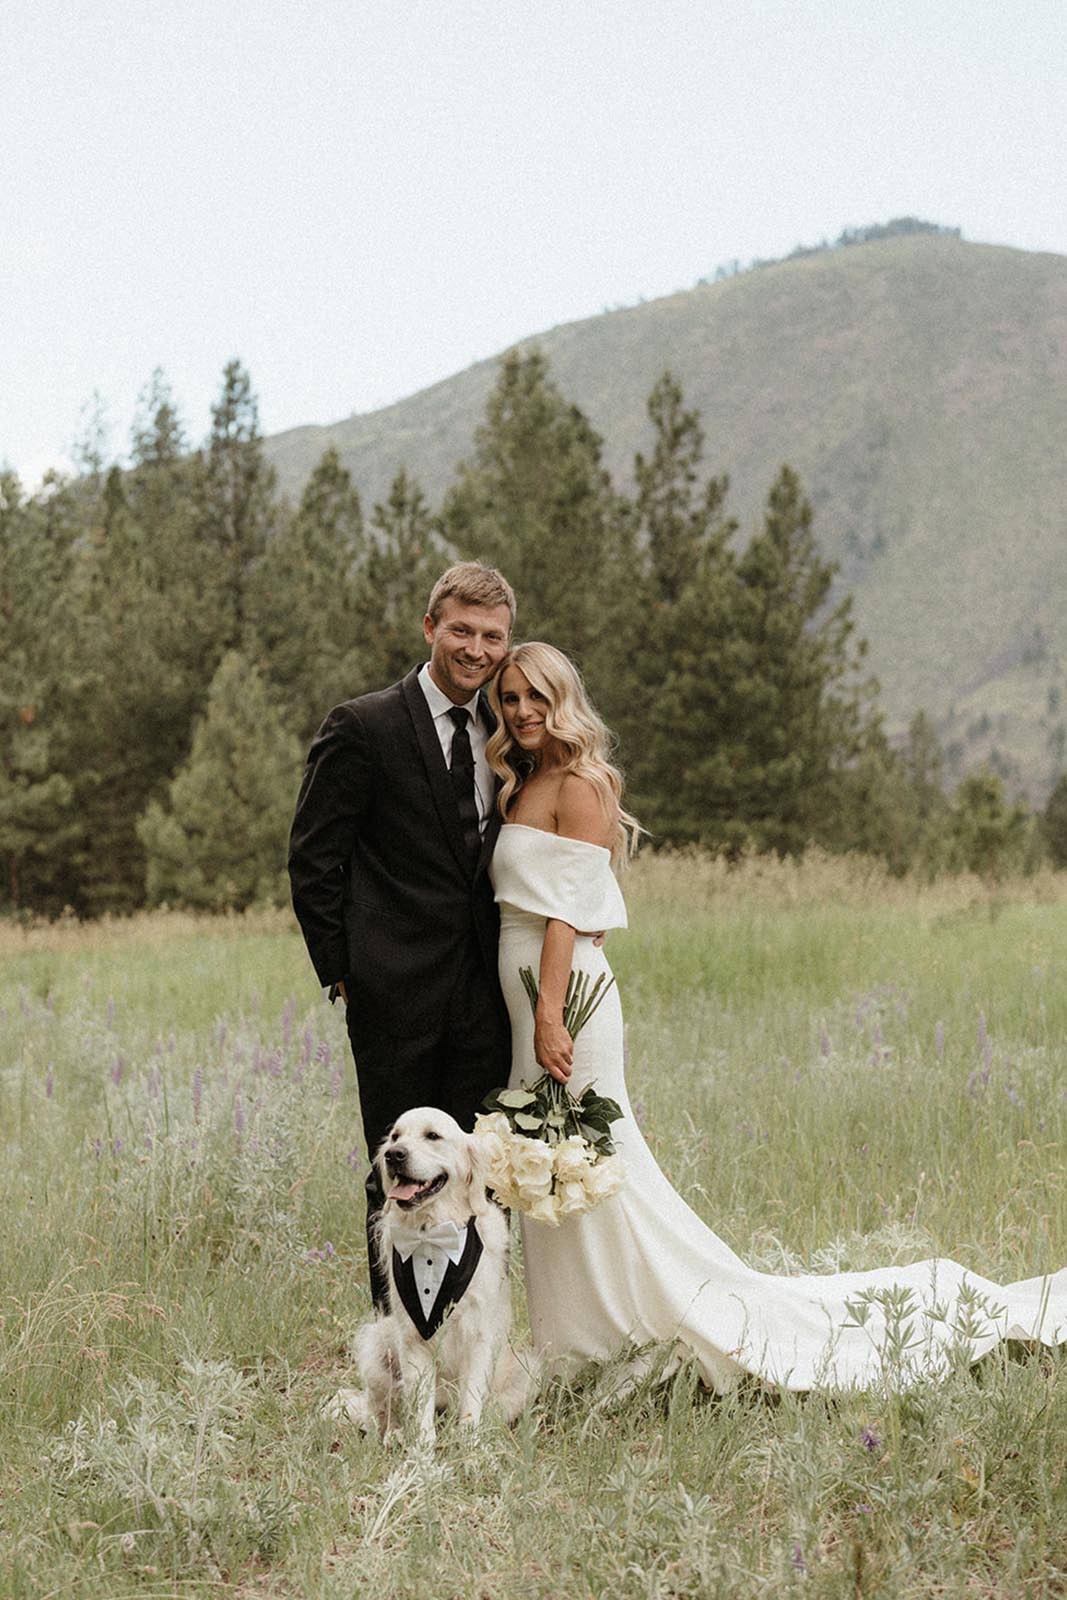 Family picture with the bride, groom and dog